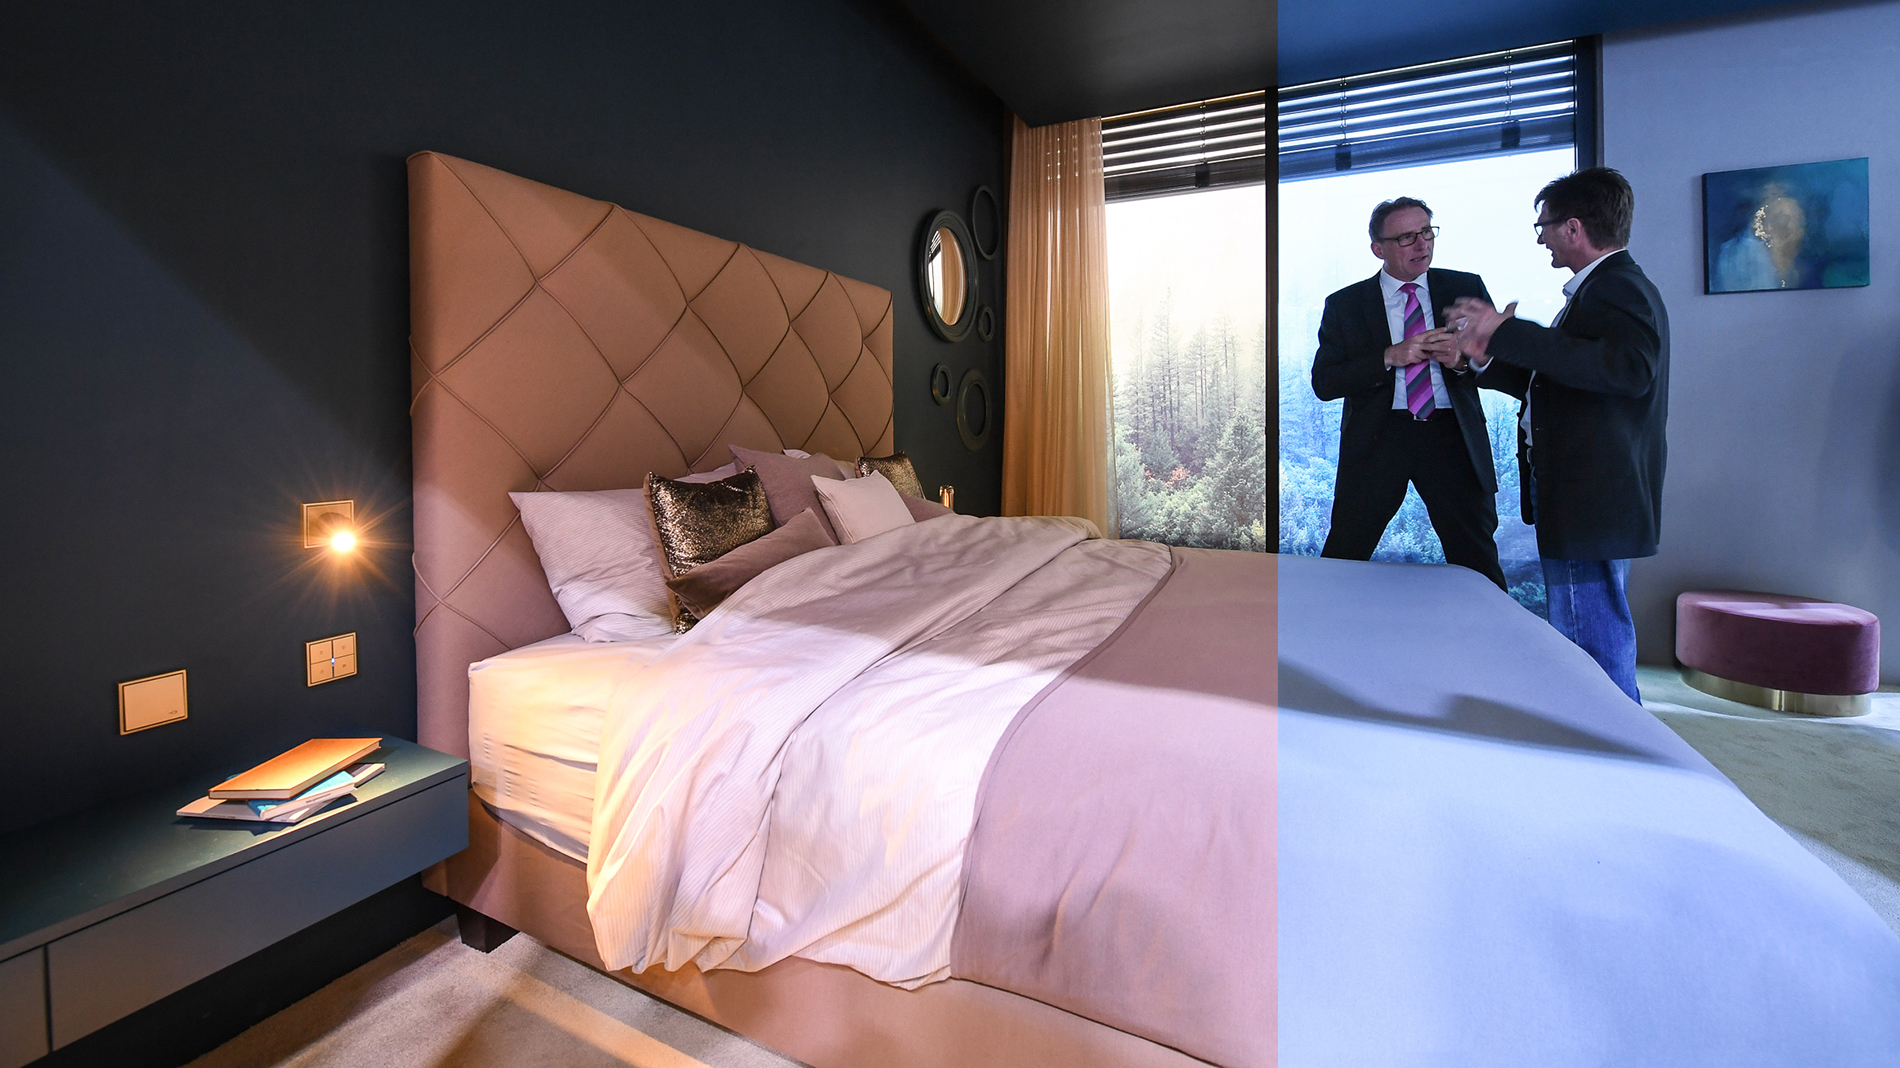 HCL concepts also cater for a daylight-like atmosphere and influence guests’ feeling of wellbeing in hotels. (Source: Messe Frankfurt / Pietro Sutera)